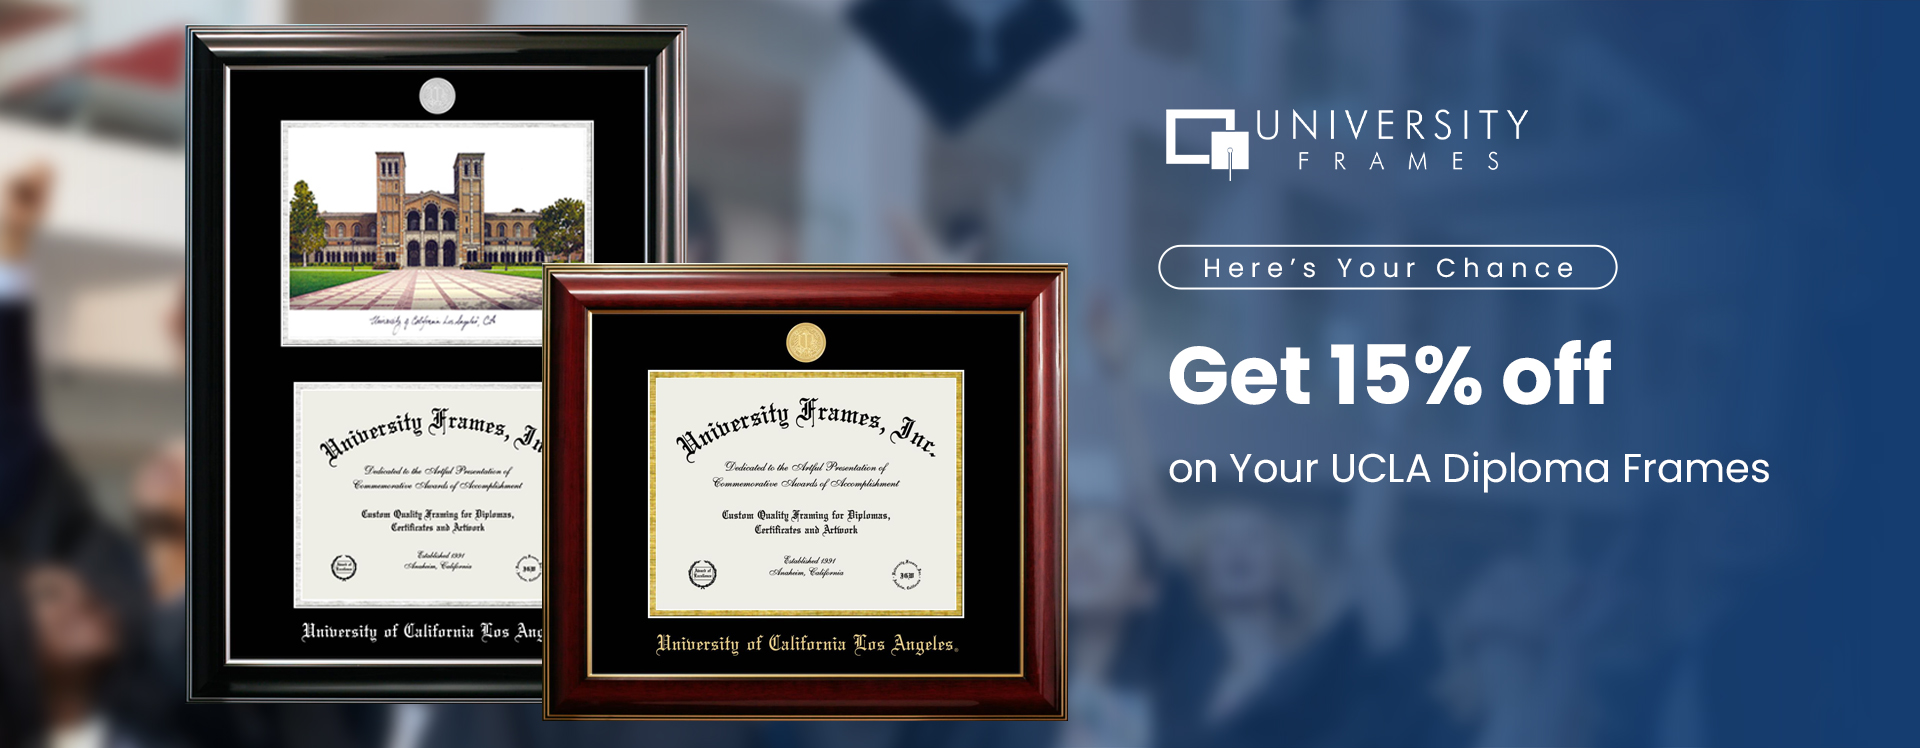 Here’s Your Chance to Get a 15% Off on Your UCLA Diploma Frames